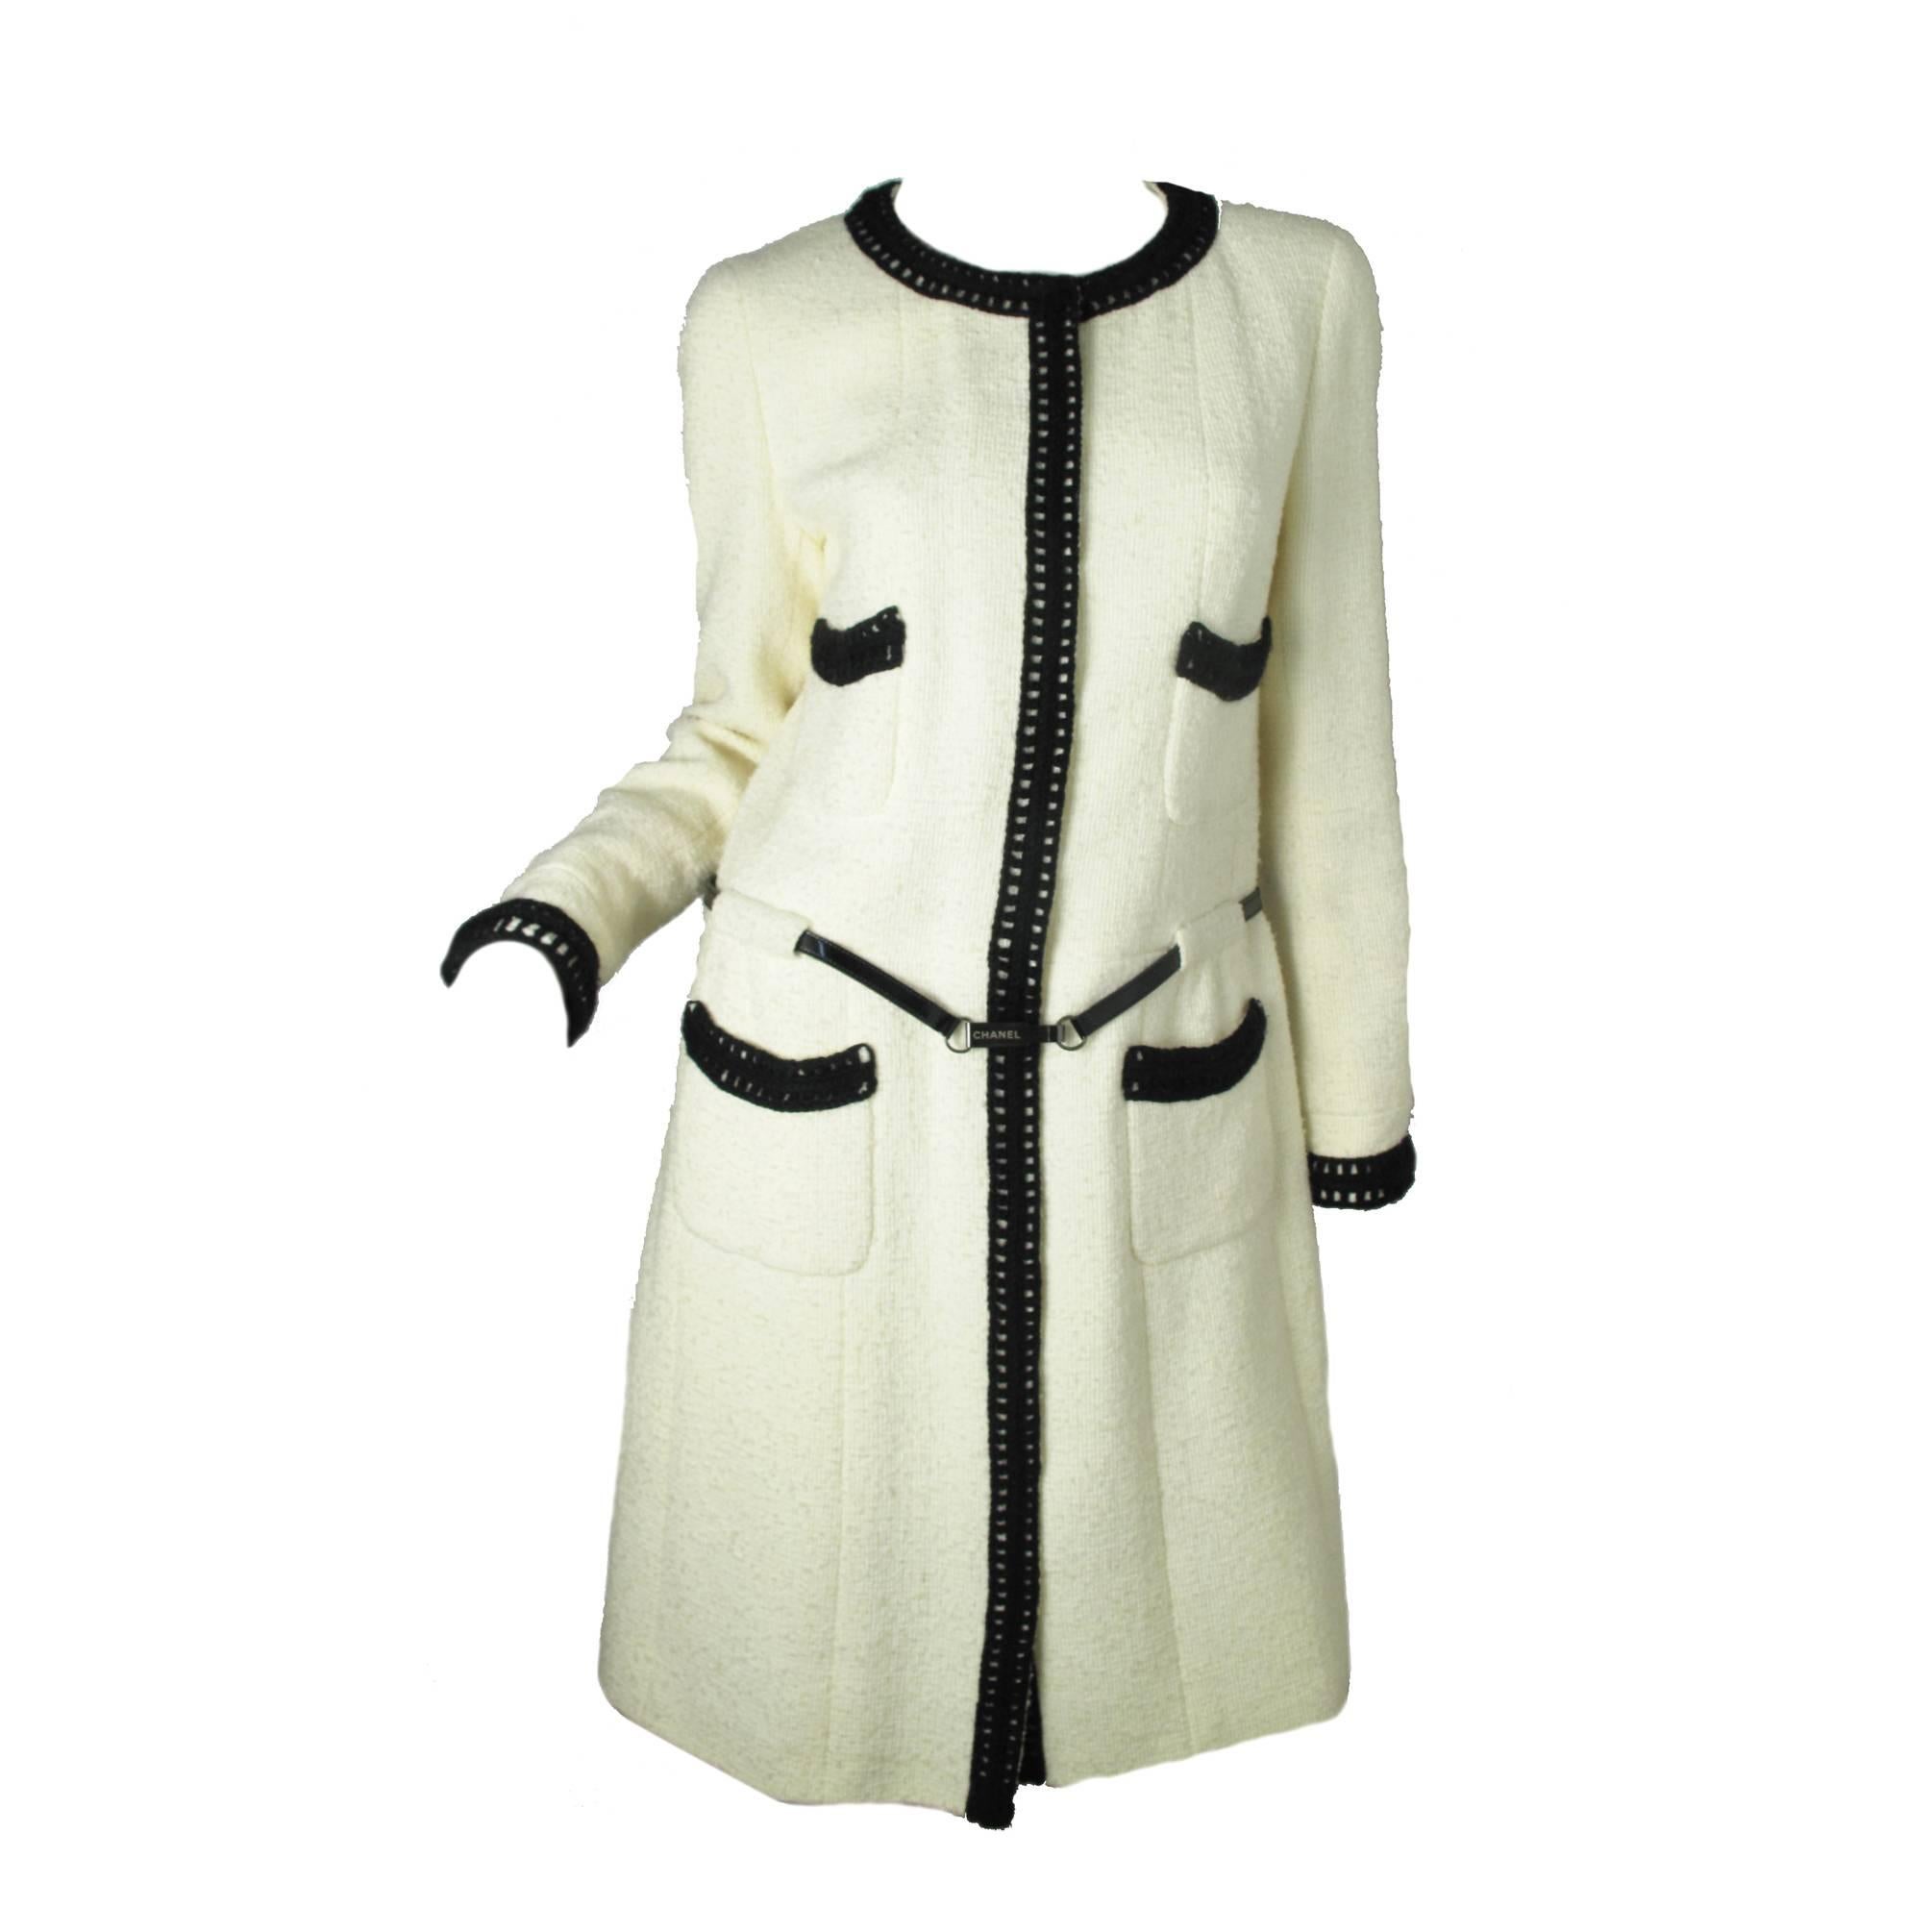 Chanel Boucle Dress with Crochet Trim and Patent Belt 